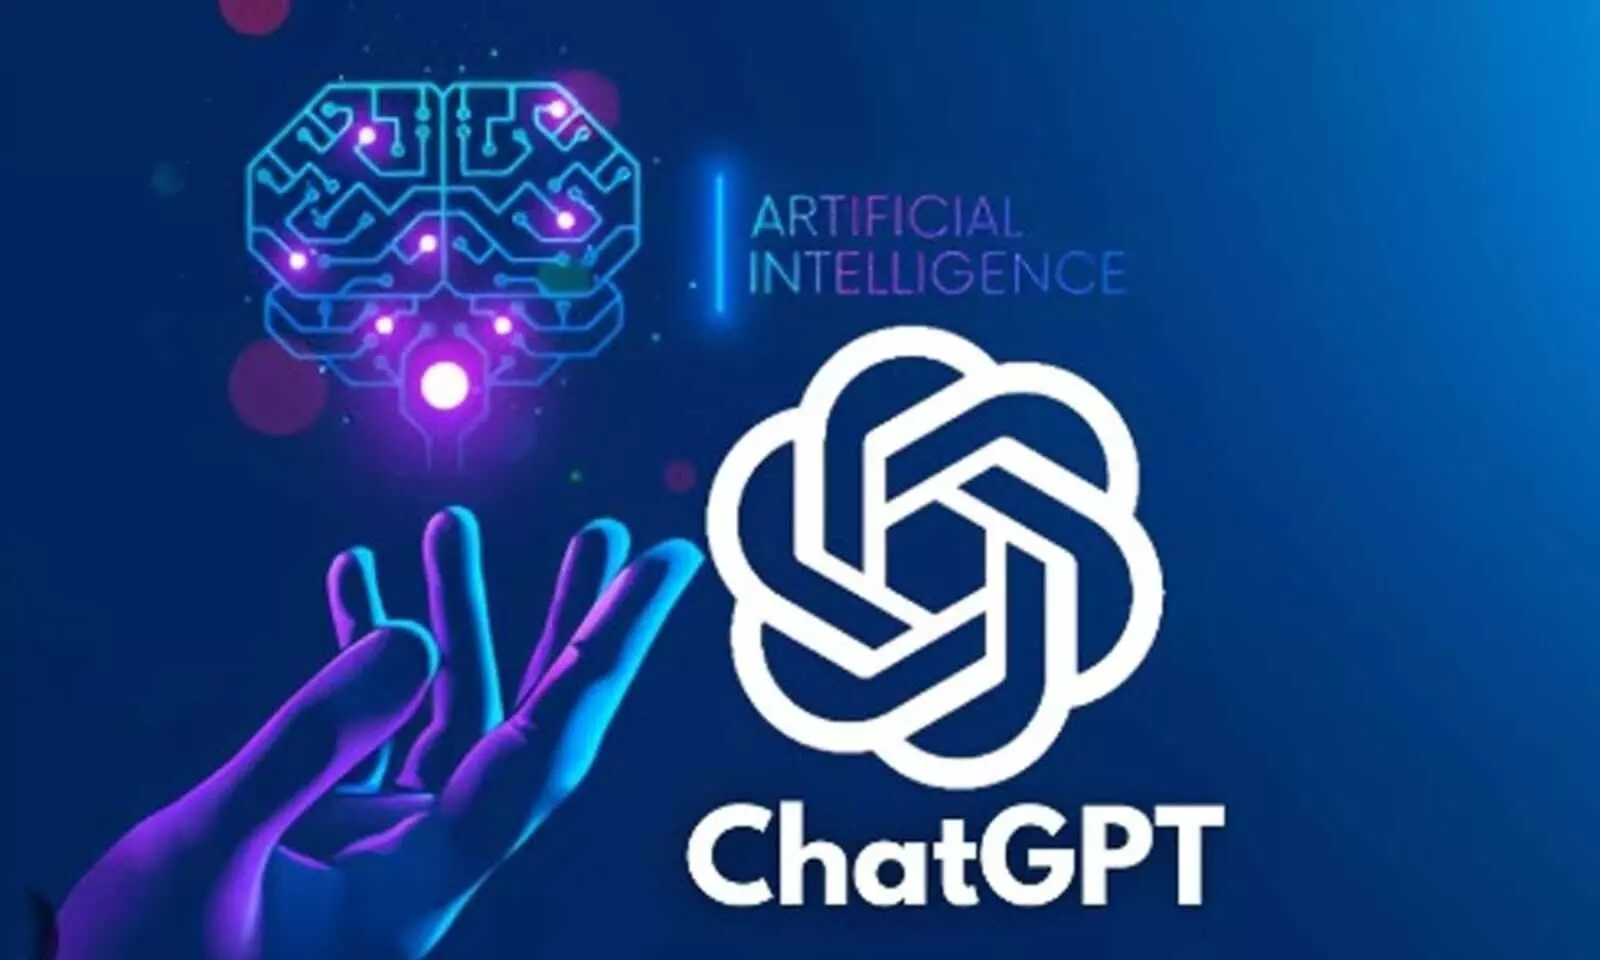 ChatGPT drives 60% of AI traffic in 24 billion visits